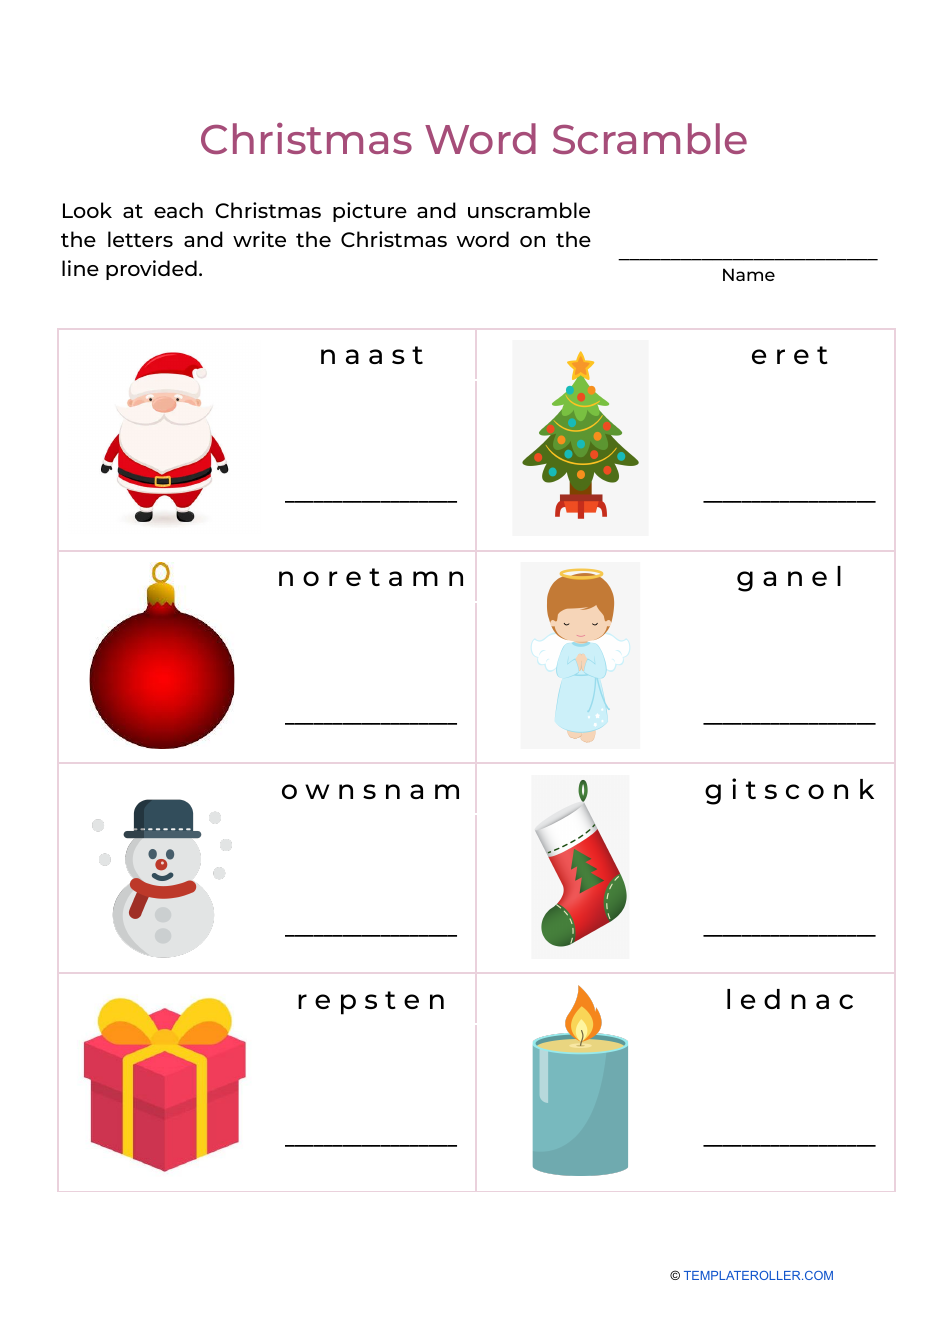 Christmas Word Scramble image preview - Test your holiday vocabulary